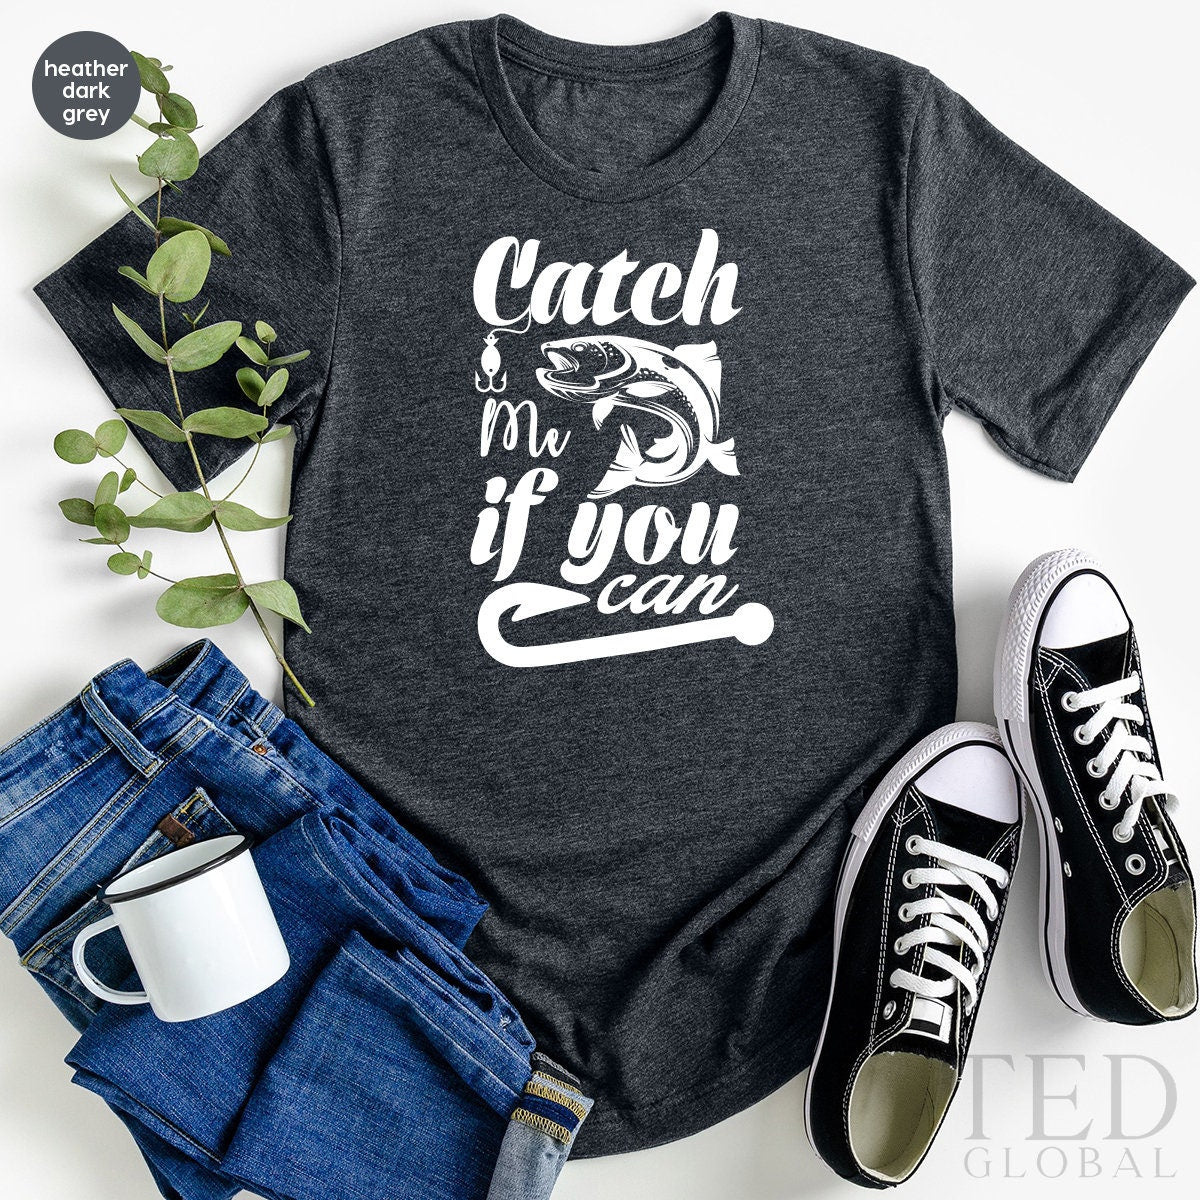 Fishing TShirt, Cool Fisherman T Shirt, Fisher Men Shirt, Shirt For Fly Fisher Dad, Fathers Day Shirt, Boating Lover Tees, Gift For Husband - Fastdeliverytees.com